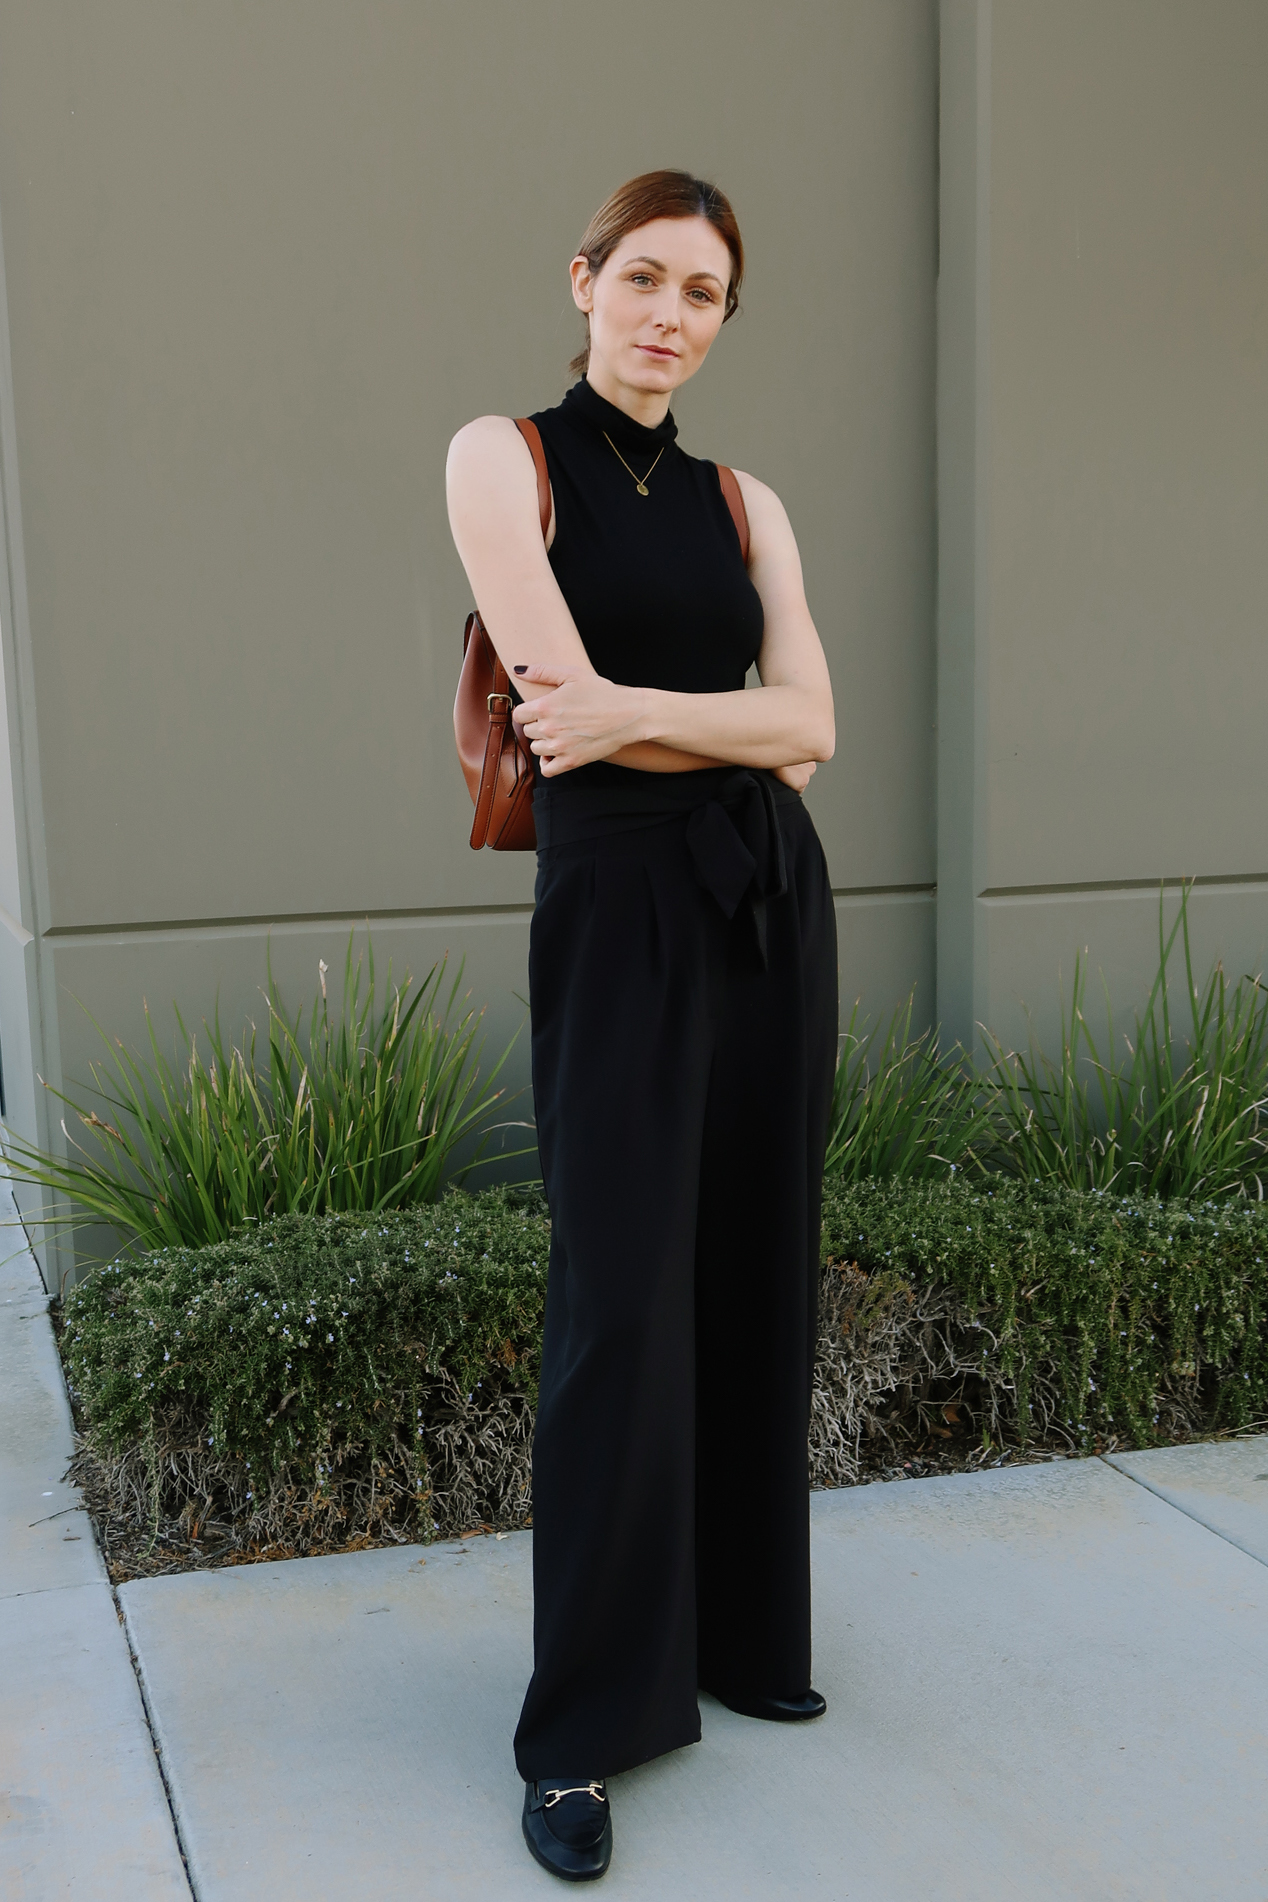 Wide-leg trousers casual outfit | Easy Casual Outfits To Try Right Now by popular California fashion blog, Tea Cups and Tulips: image of a woman outside wearing an Asos top, SheIn Paperbag Waist Slant Pocket Wide Leg Pants, and Amazon Happiness Boutique Circle Necklace.